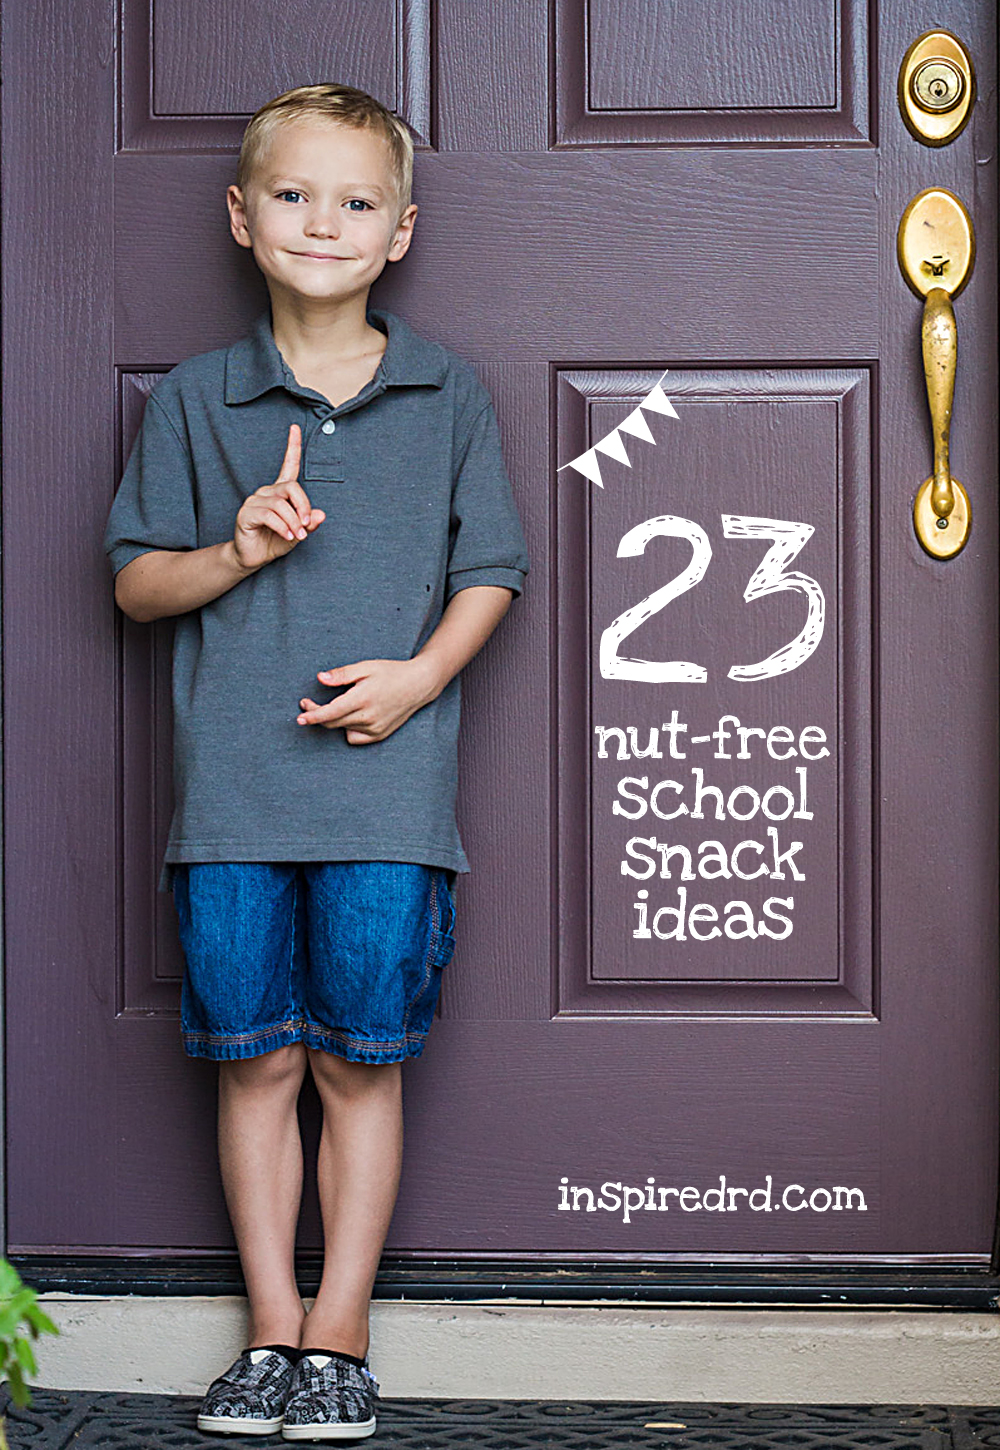 23 Nut-Free Snack Ideas for School from inspiredrd.com